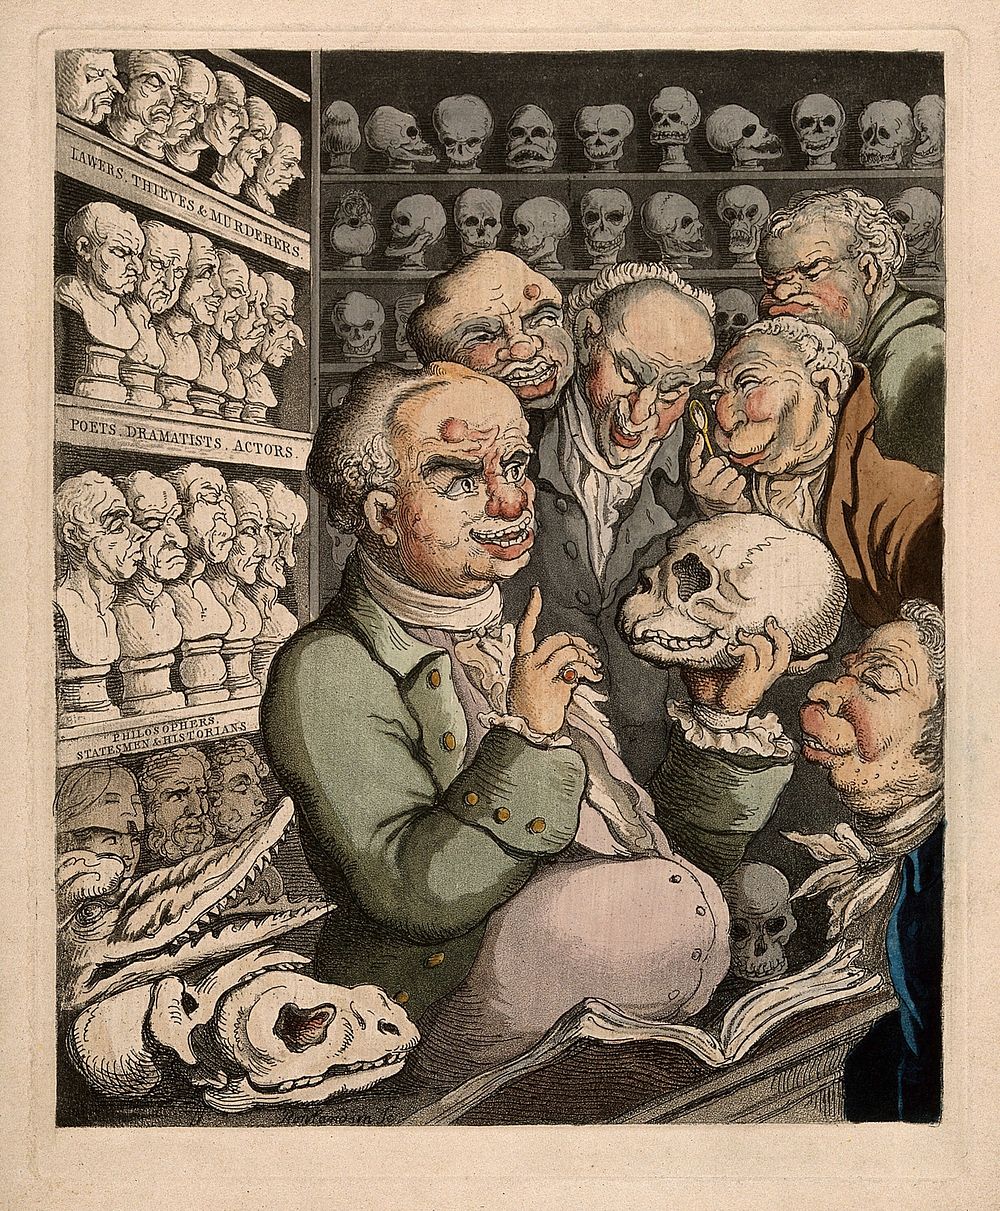 Franz Joseph Gall leading a discussion on phrenology with five colleagues, among his extensive collection of skulls and…